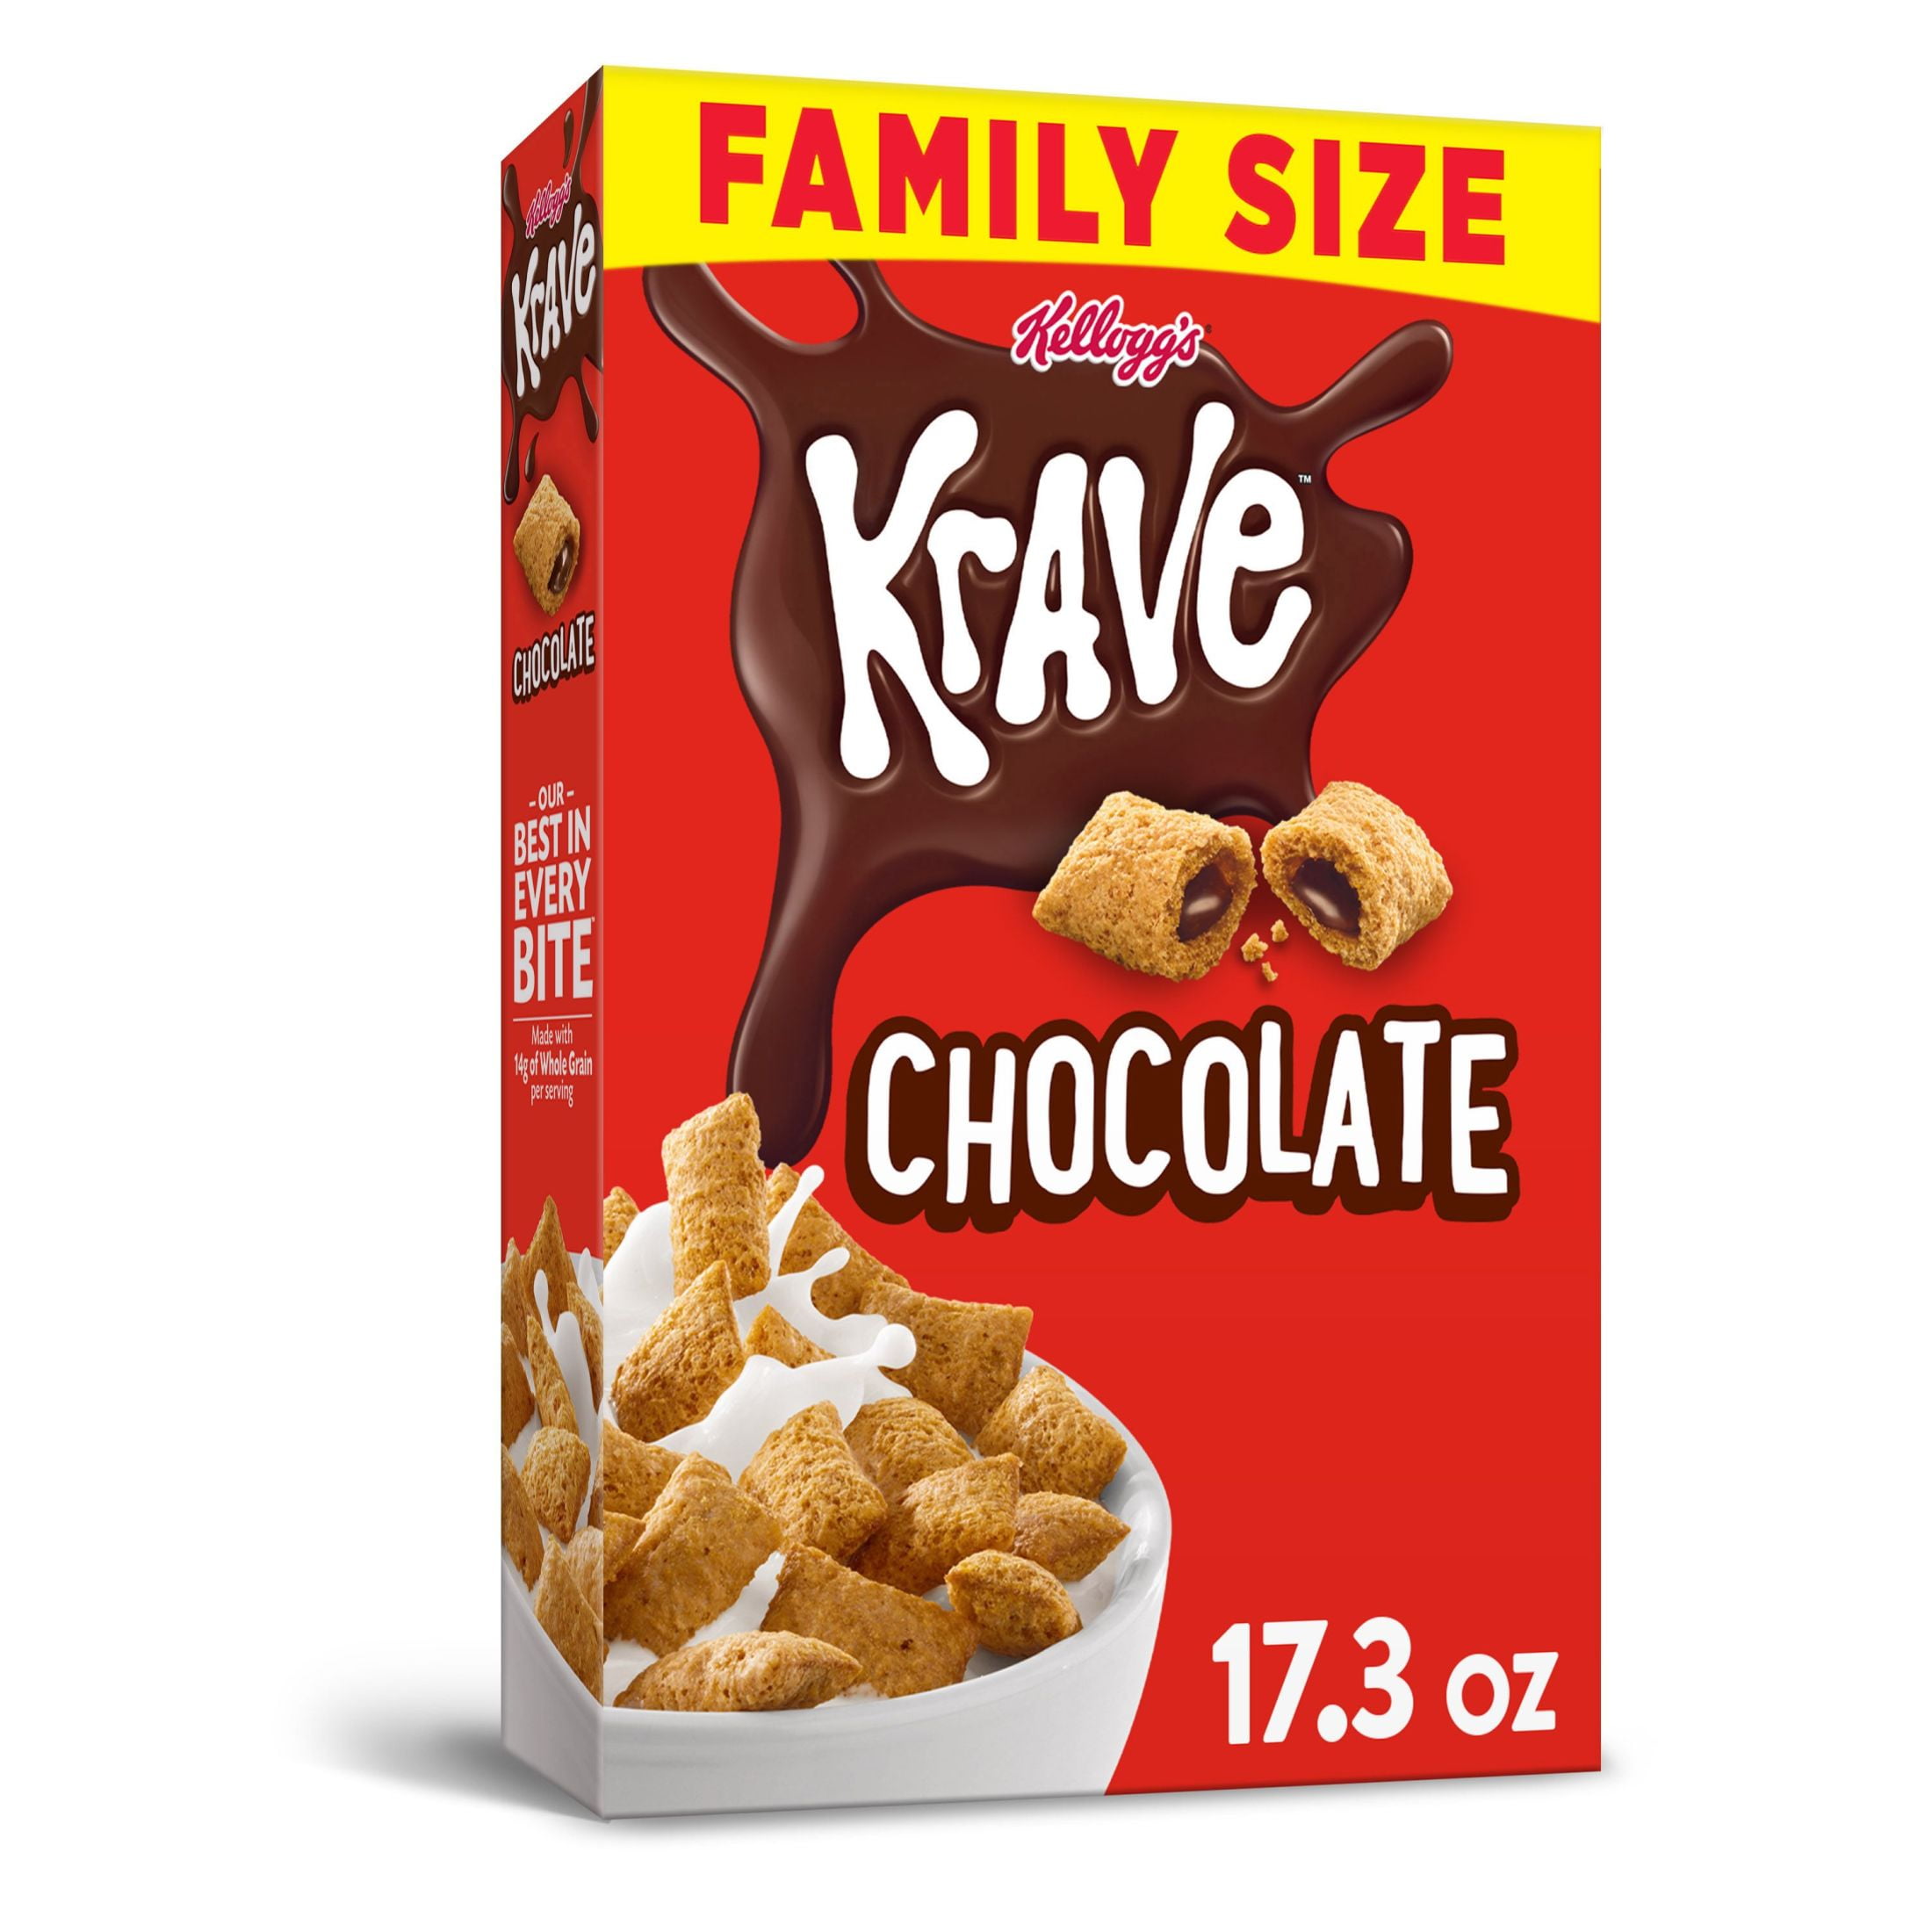 Kellogg's Krave Chocolate Cold Breakfast Cereal, 17.3 oz